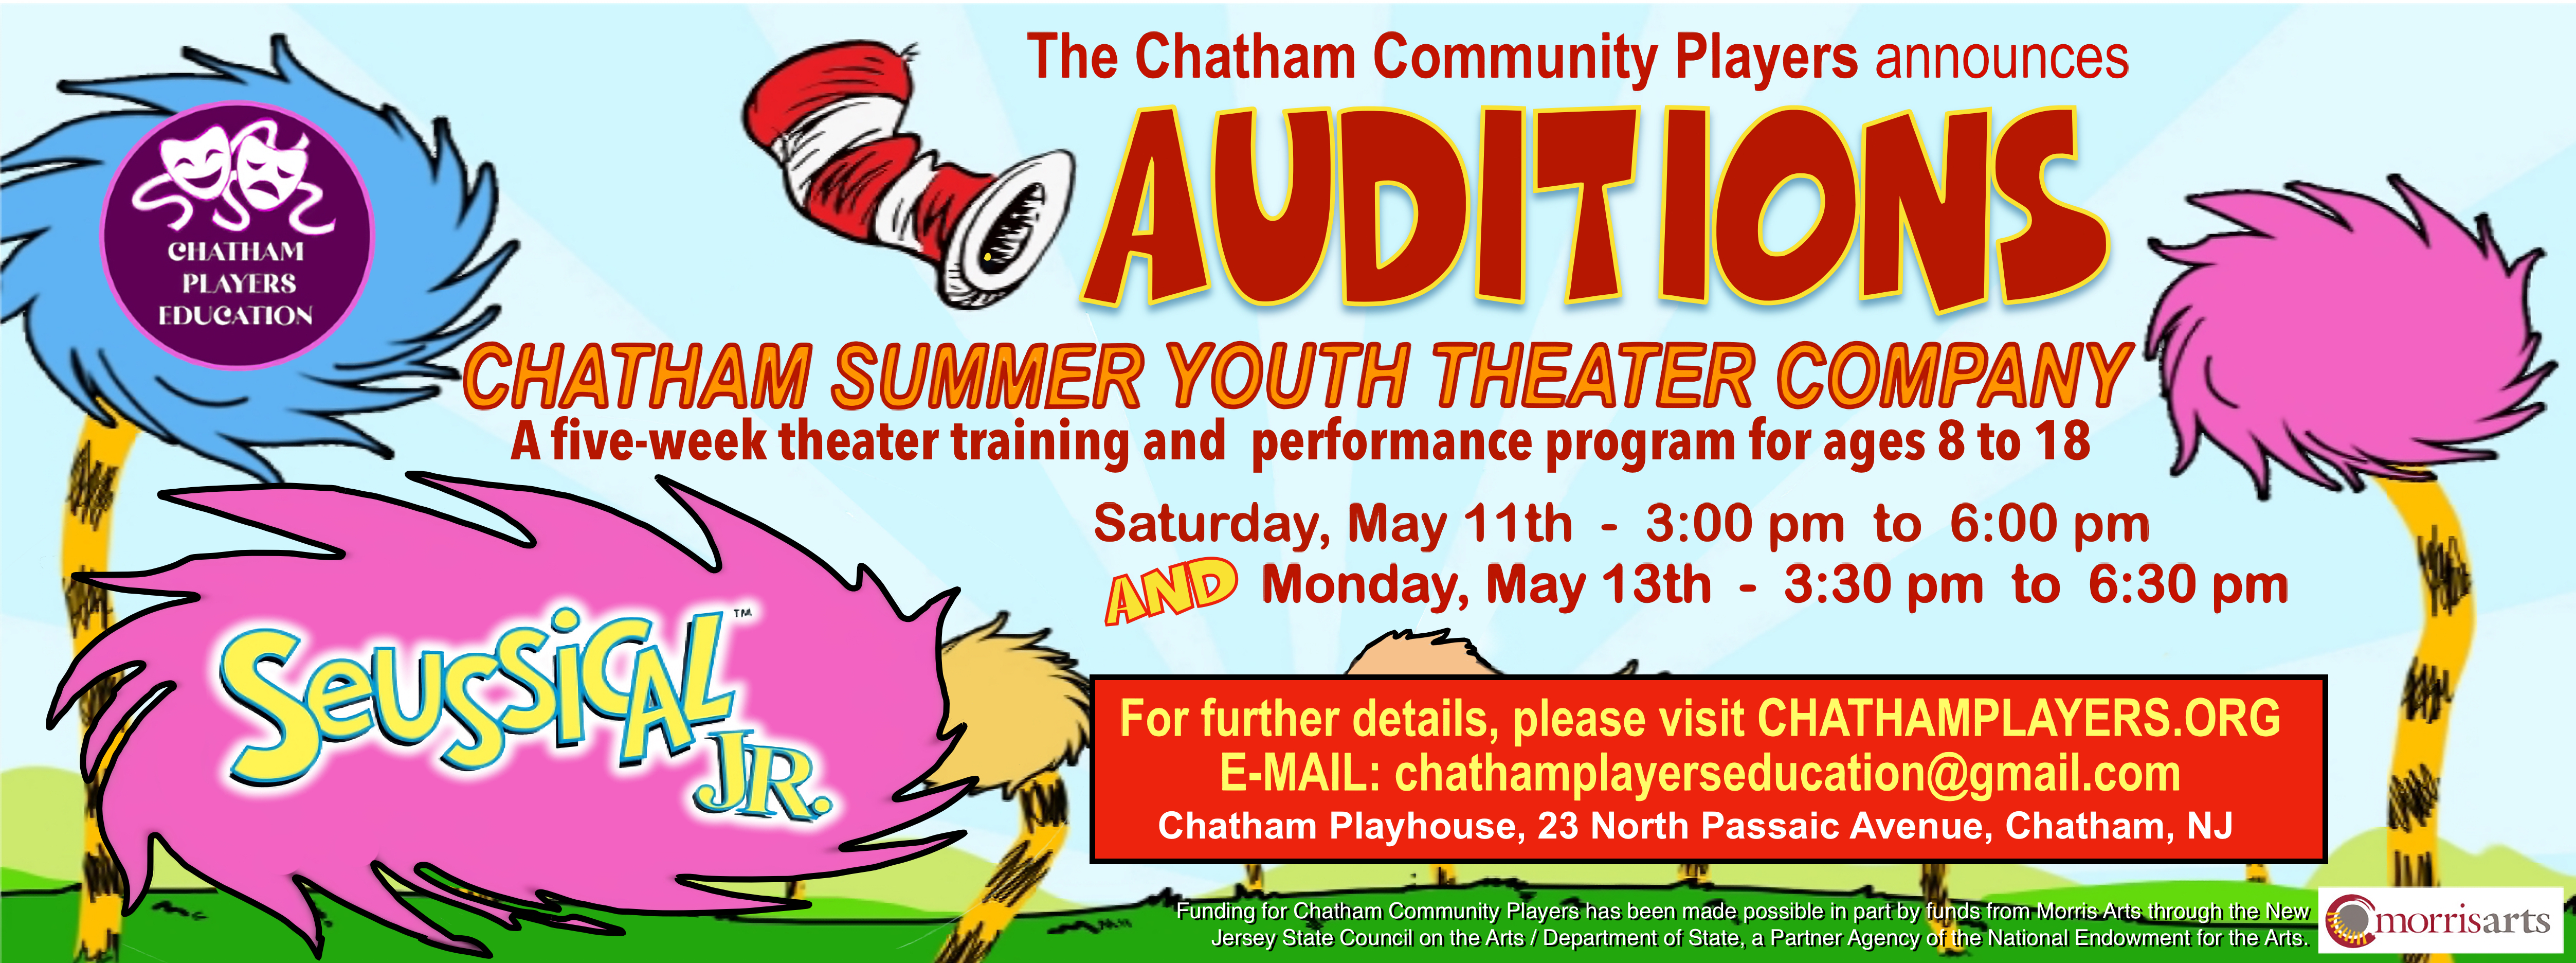 CCP's Summer Youth Theater Co. Announces SUESSICAL Jr. Auditions